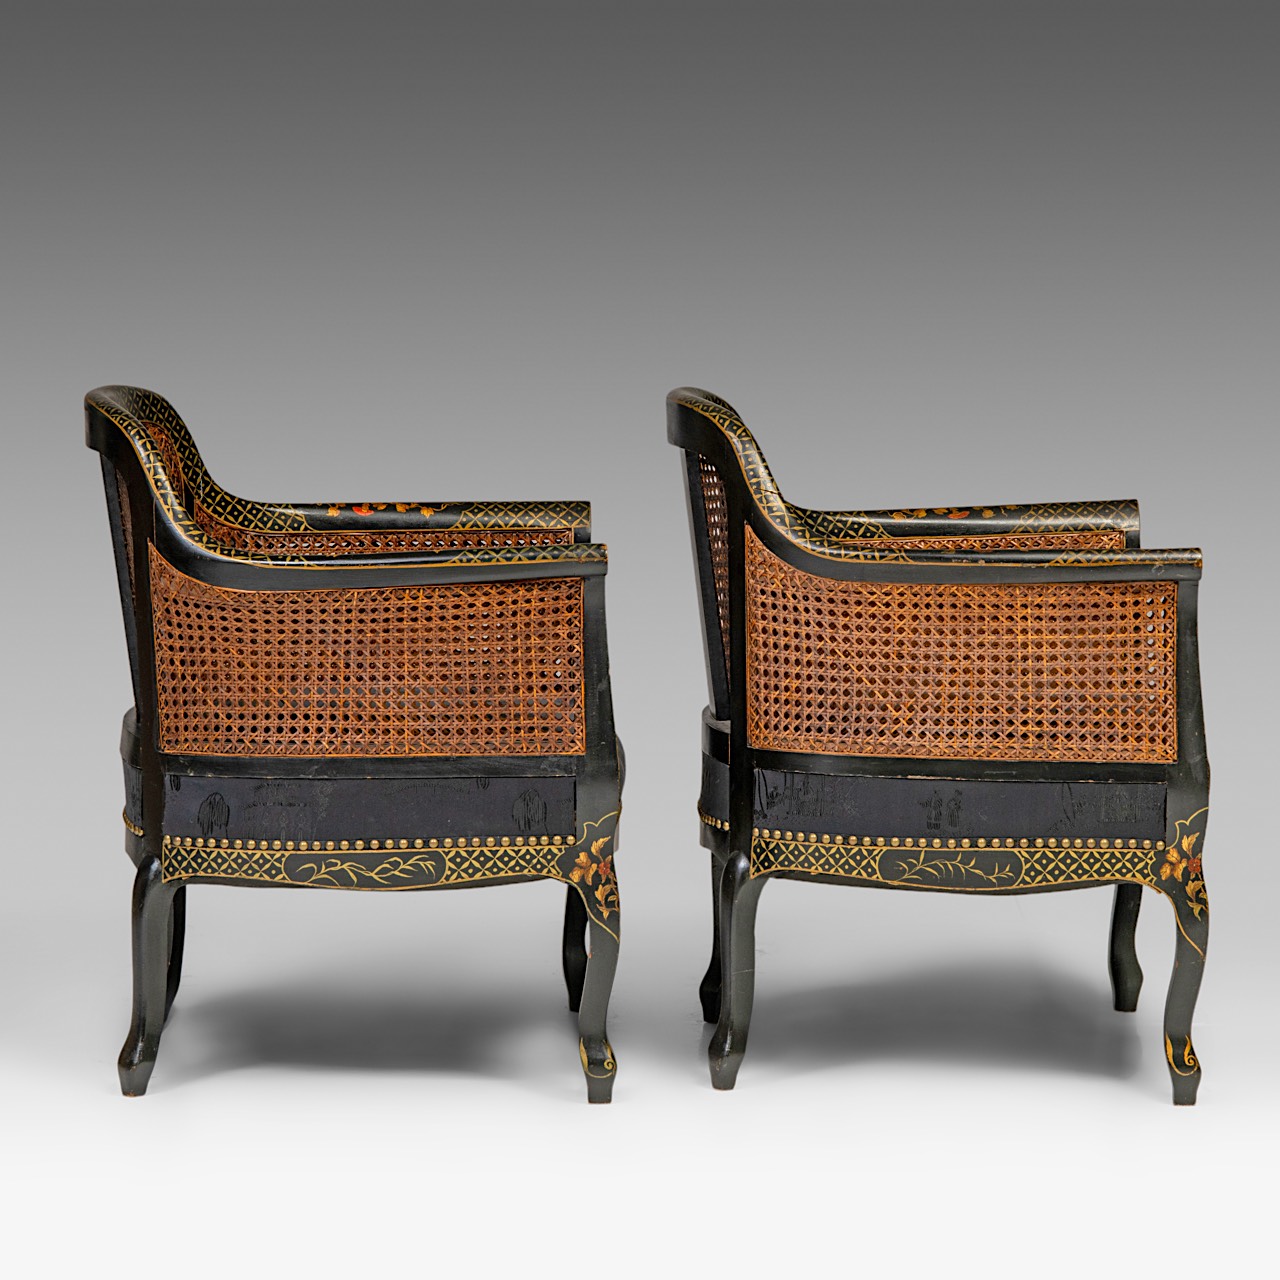 Two sets of handpainted Japonisme armchairs, with wicker panels, signed, H total 84 cm - H seat 36 c - Image 10 of 12